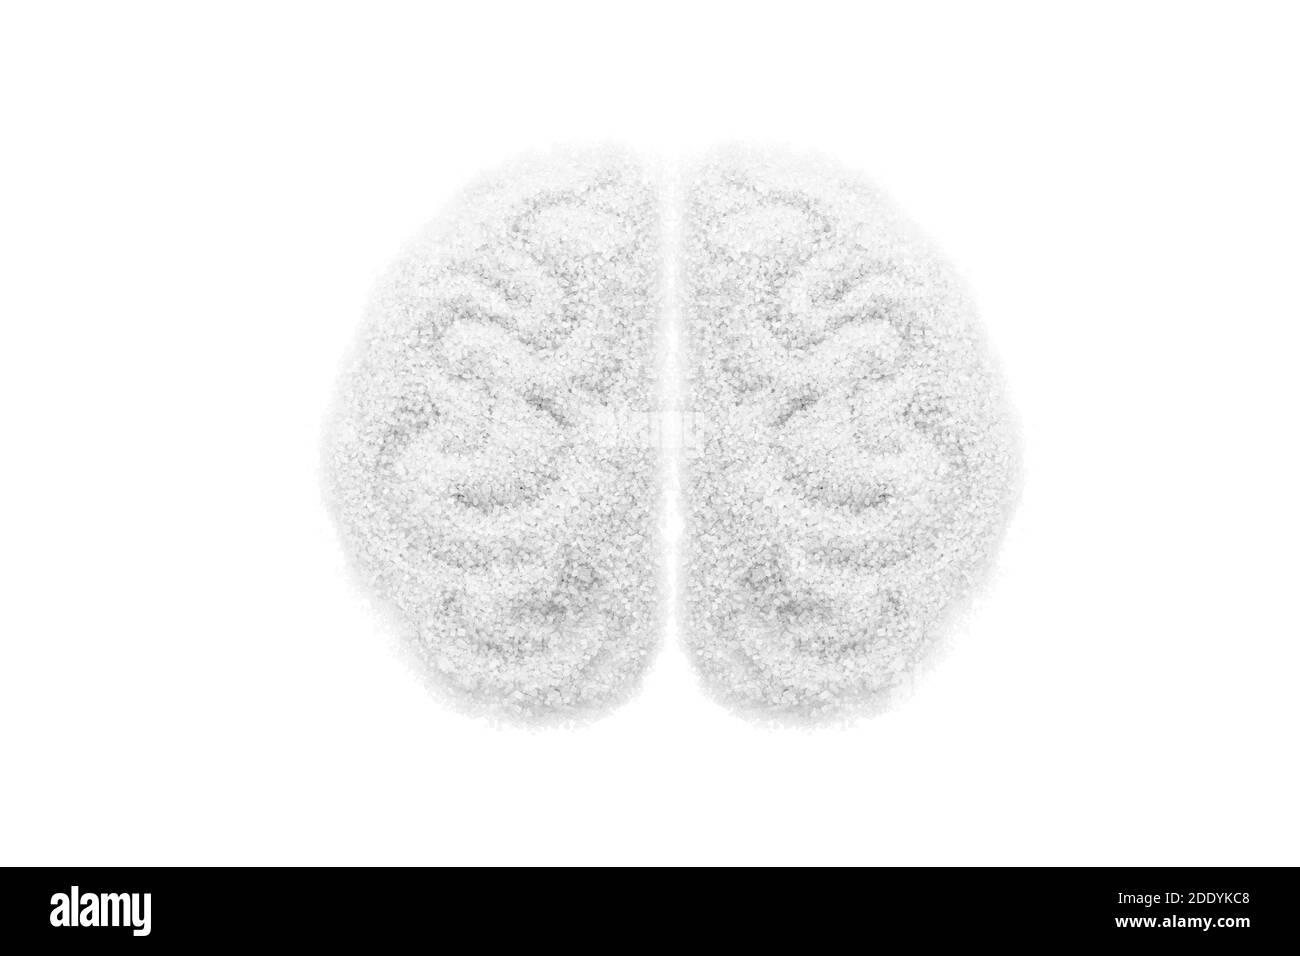 White sugar of the shape of a human brain isolated on white background Stock Photo